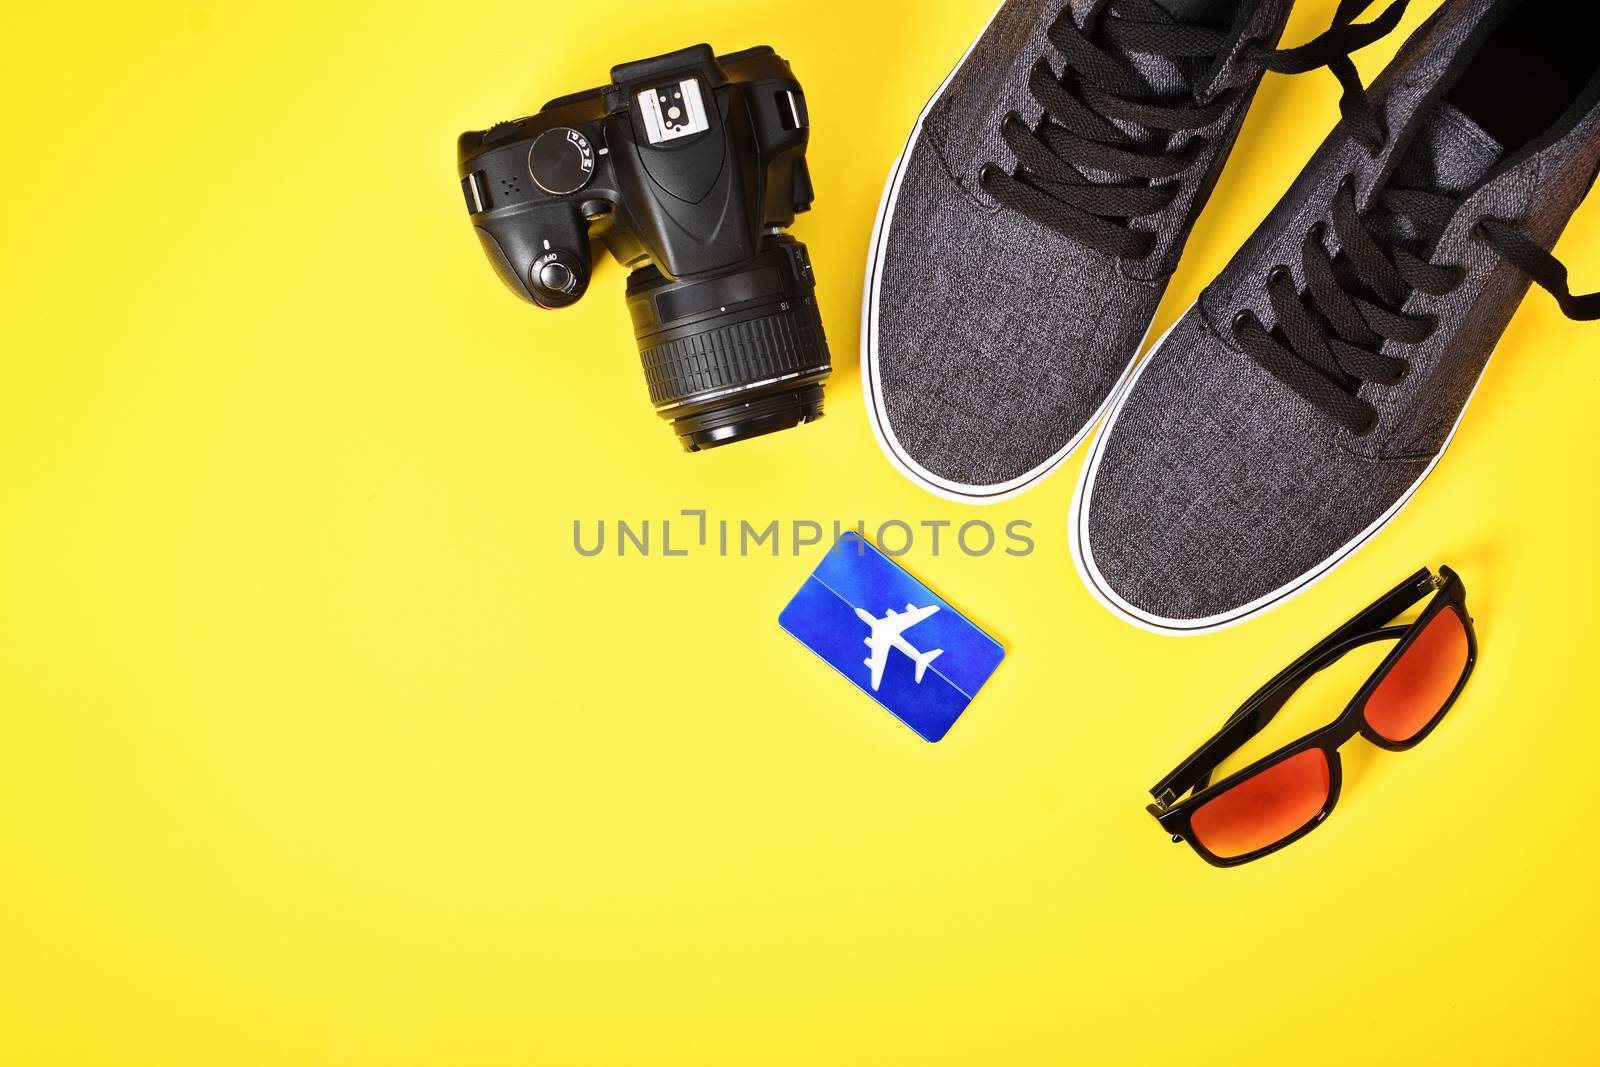 Vacation concept. Top view of camera, airplane luggage tag, sunglasses and sneakers on a yellow background. These are my travel essentials for a trip around the world or just a weekend getaway. Flat lay, copy space.